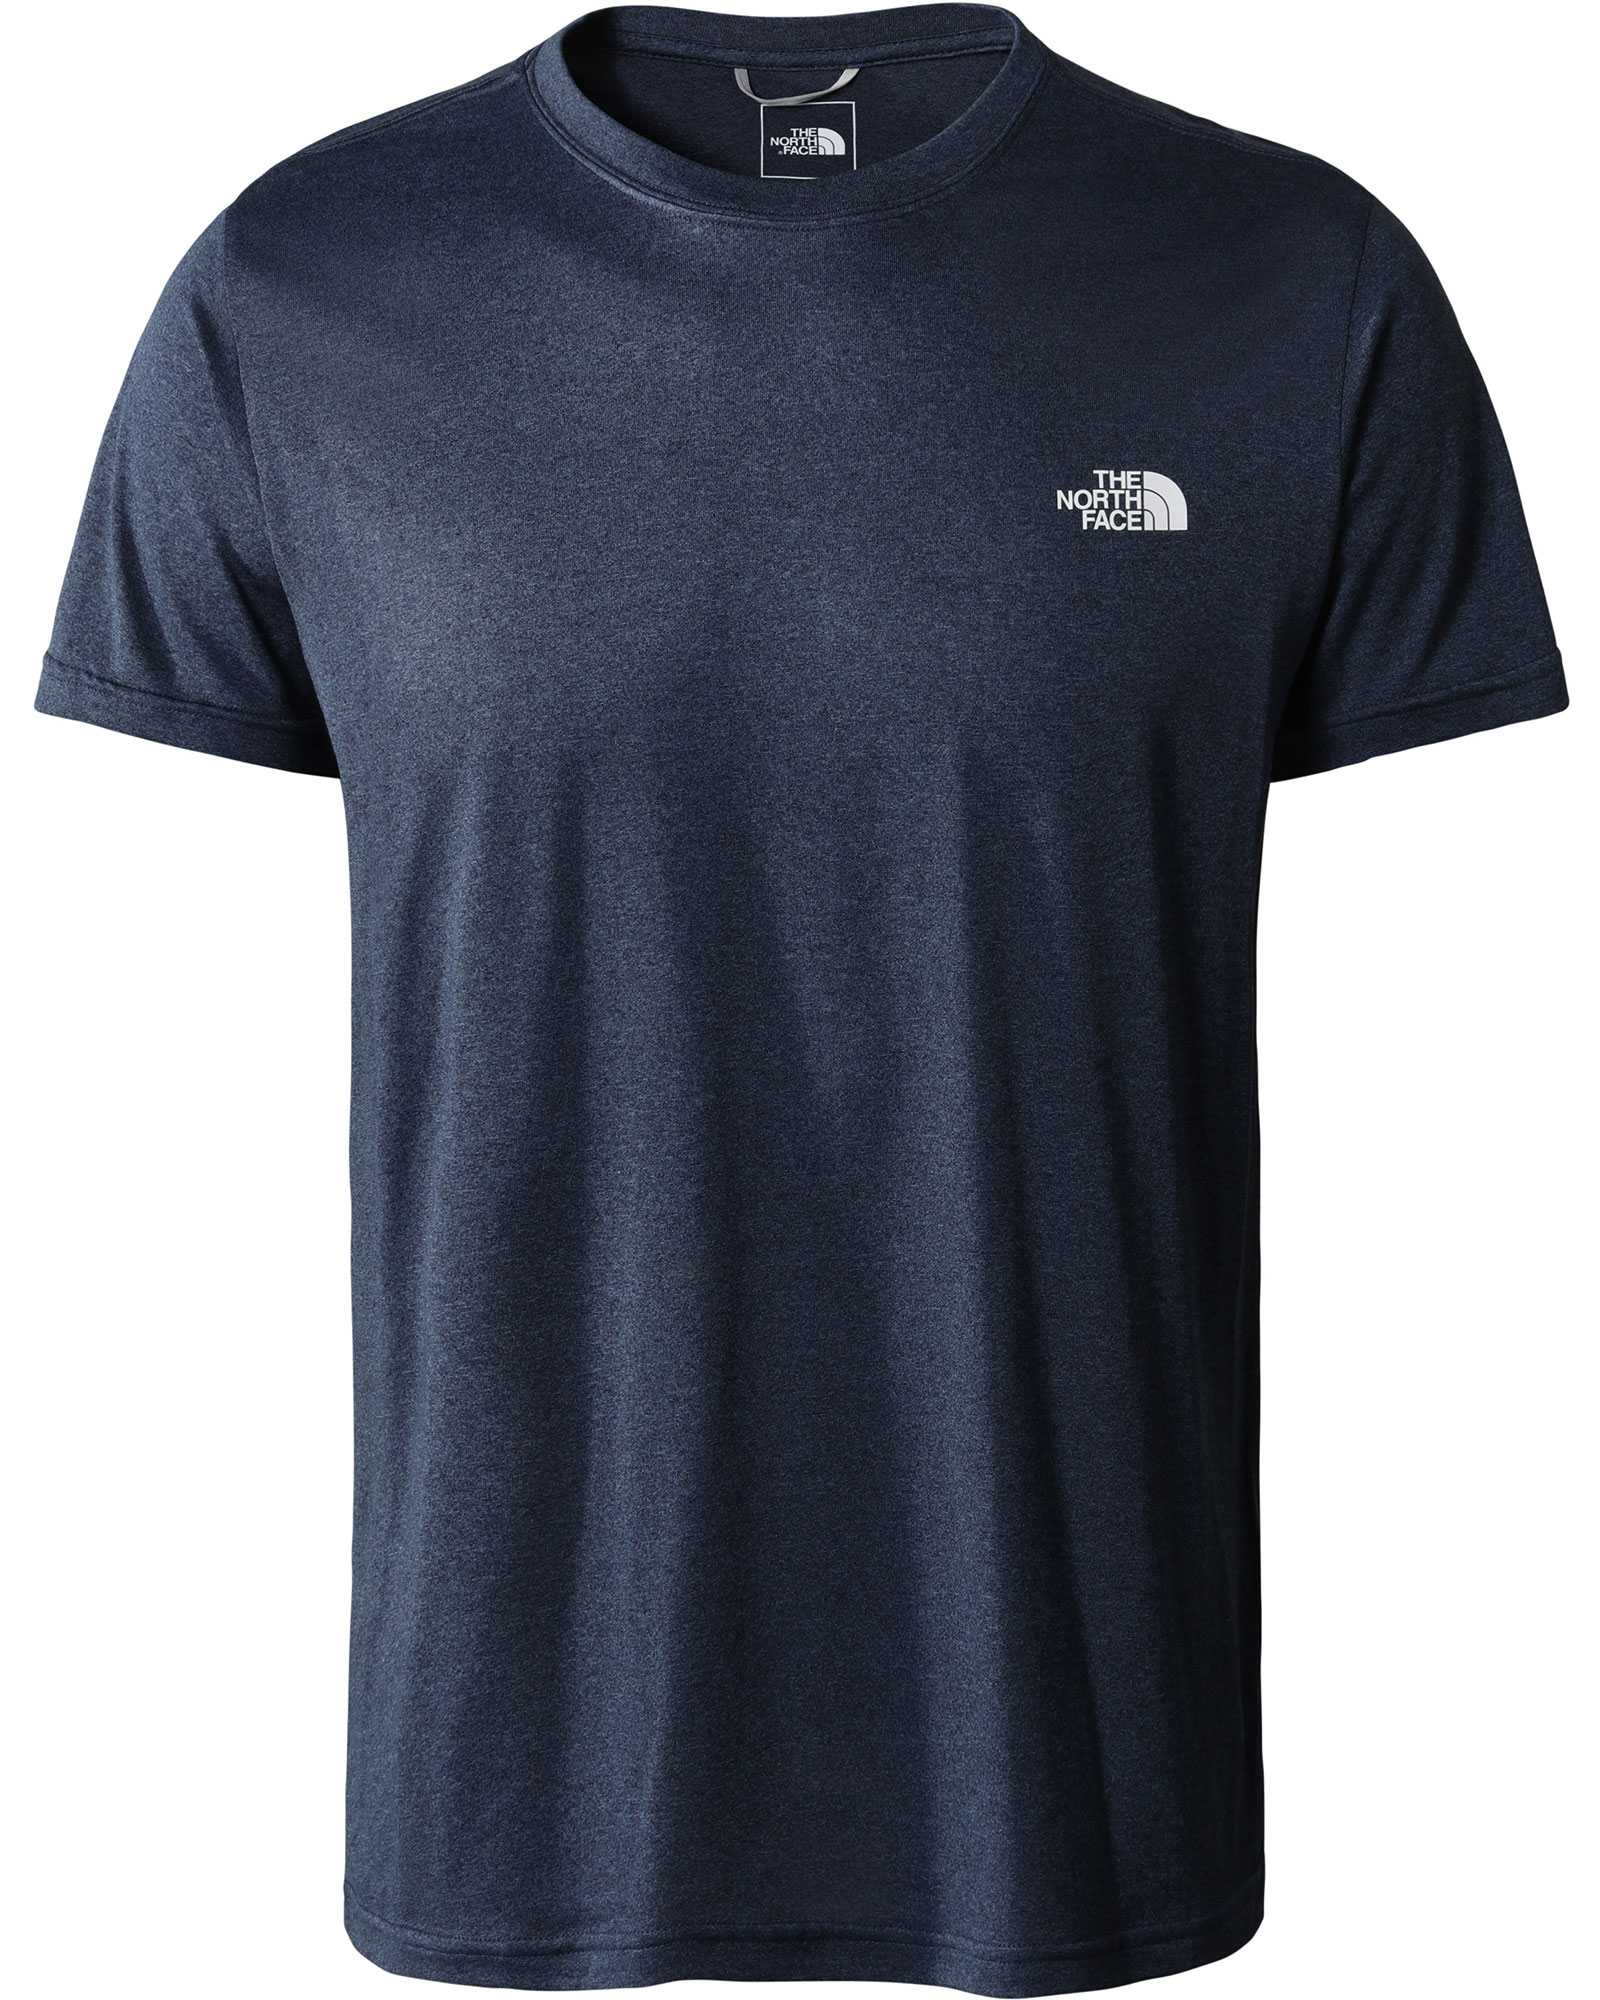 Product image of The North Face Reaxion Amp Men's Crew